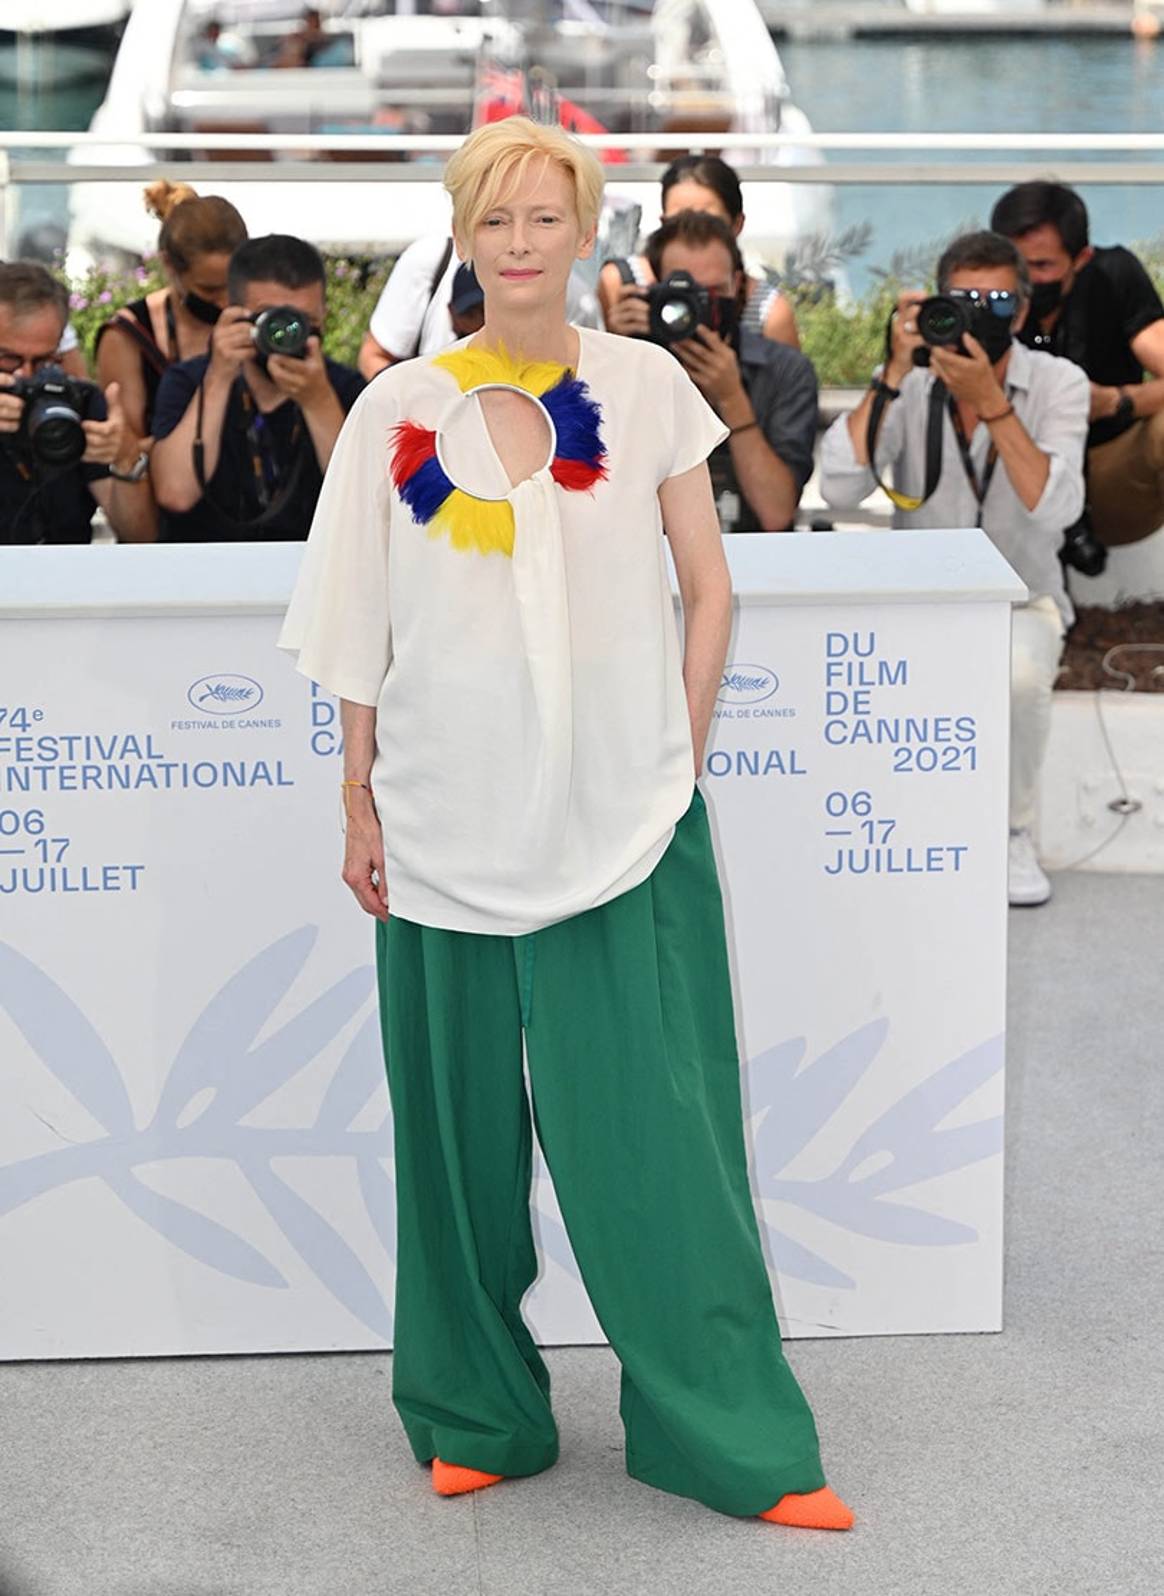 Cannes fashion: The good, the bad and the plain weird